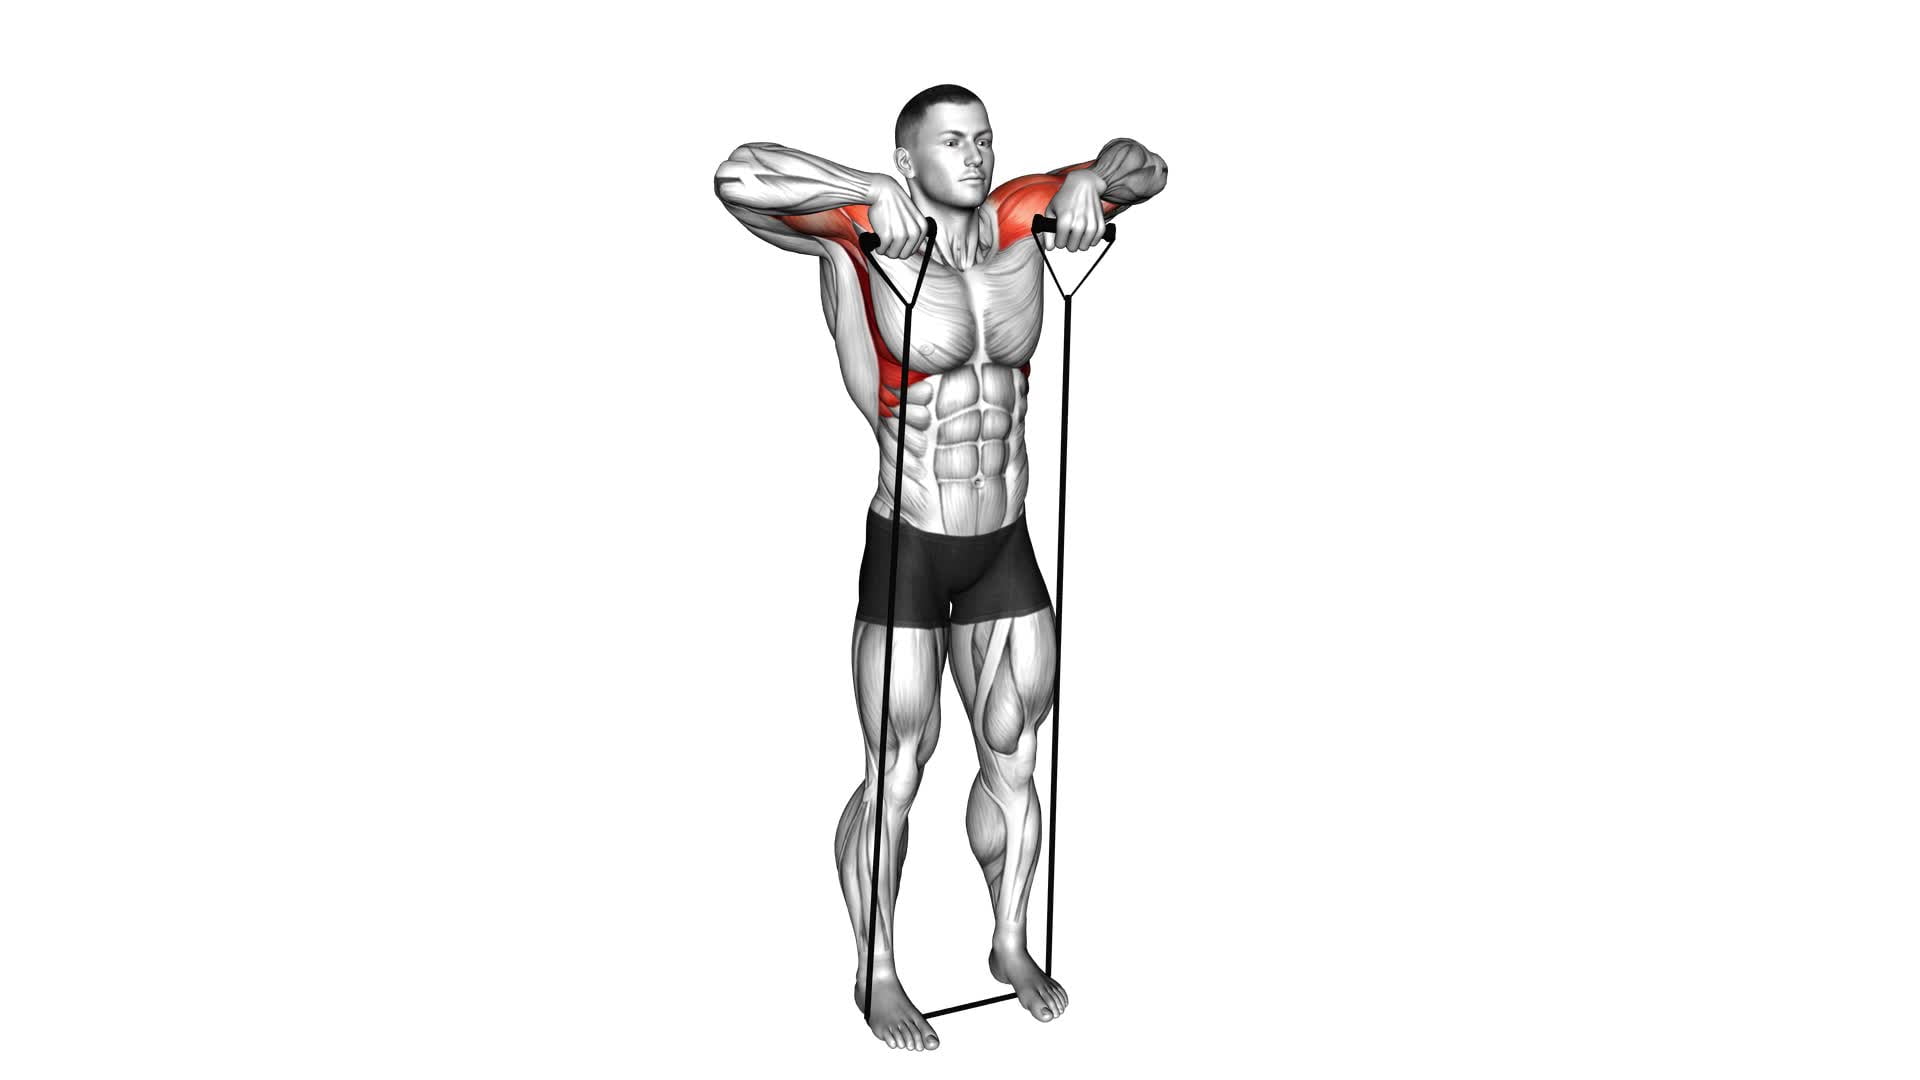 Band Upright Row (Under Two Feet) - Video Exercise Guide & Tips